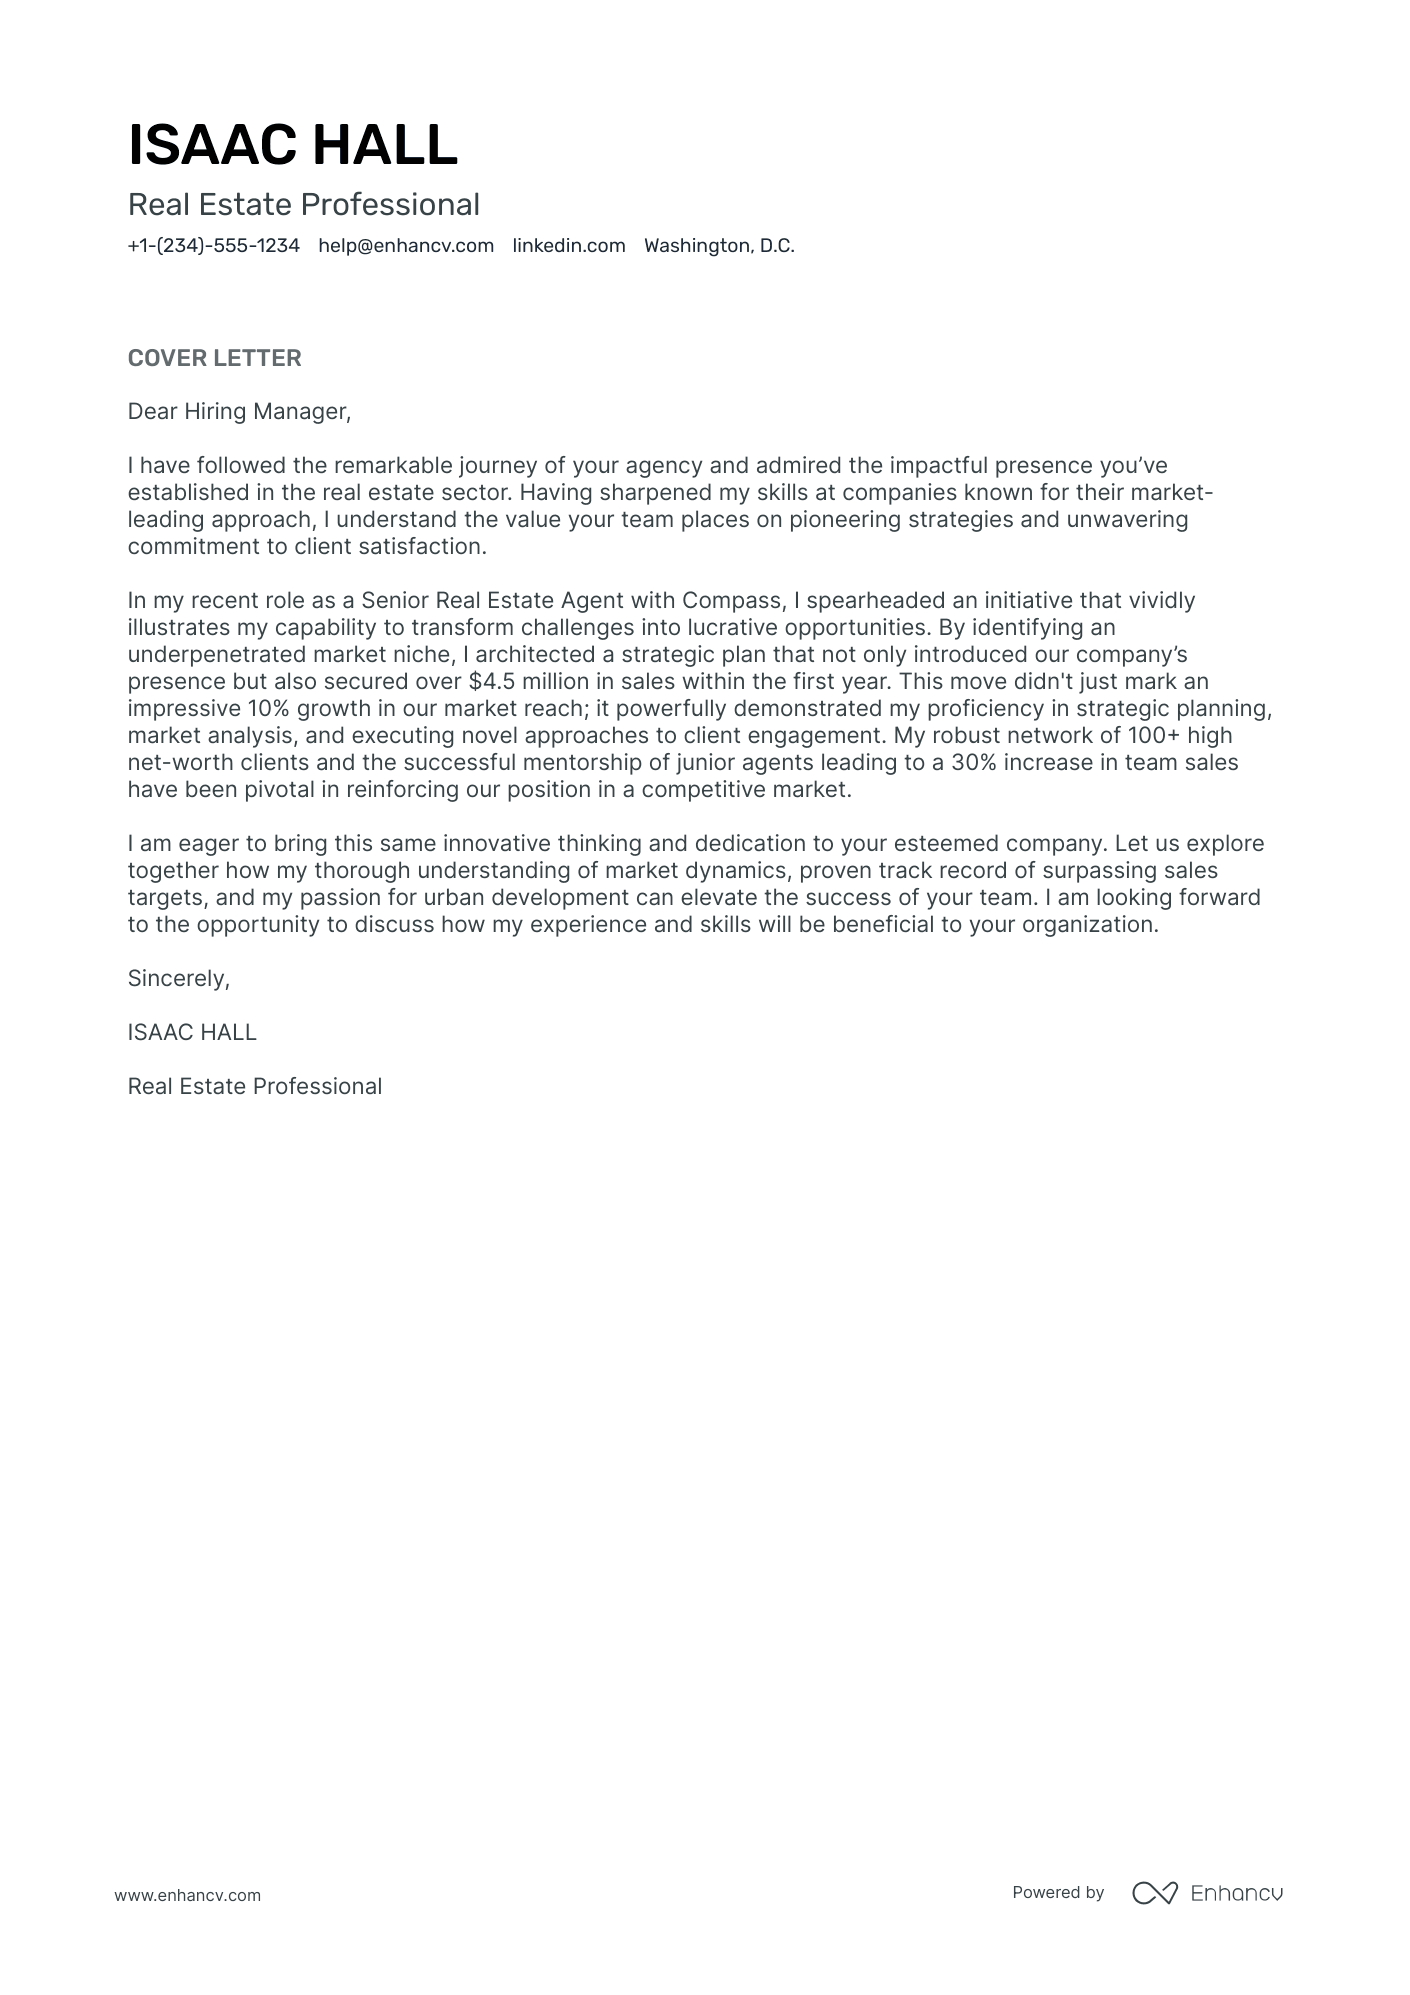 Real Estate Professional cover letter